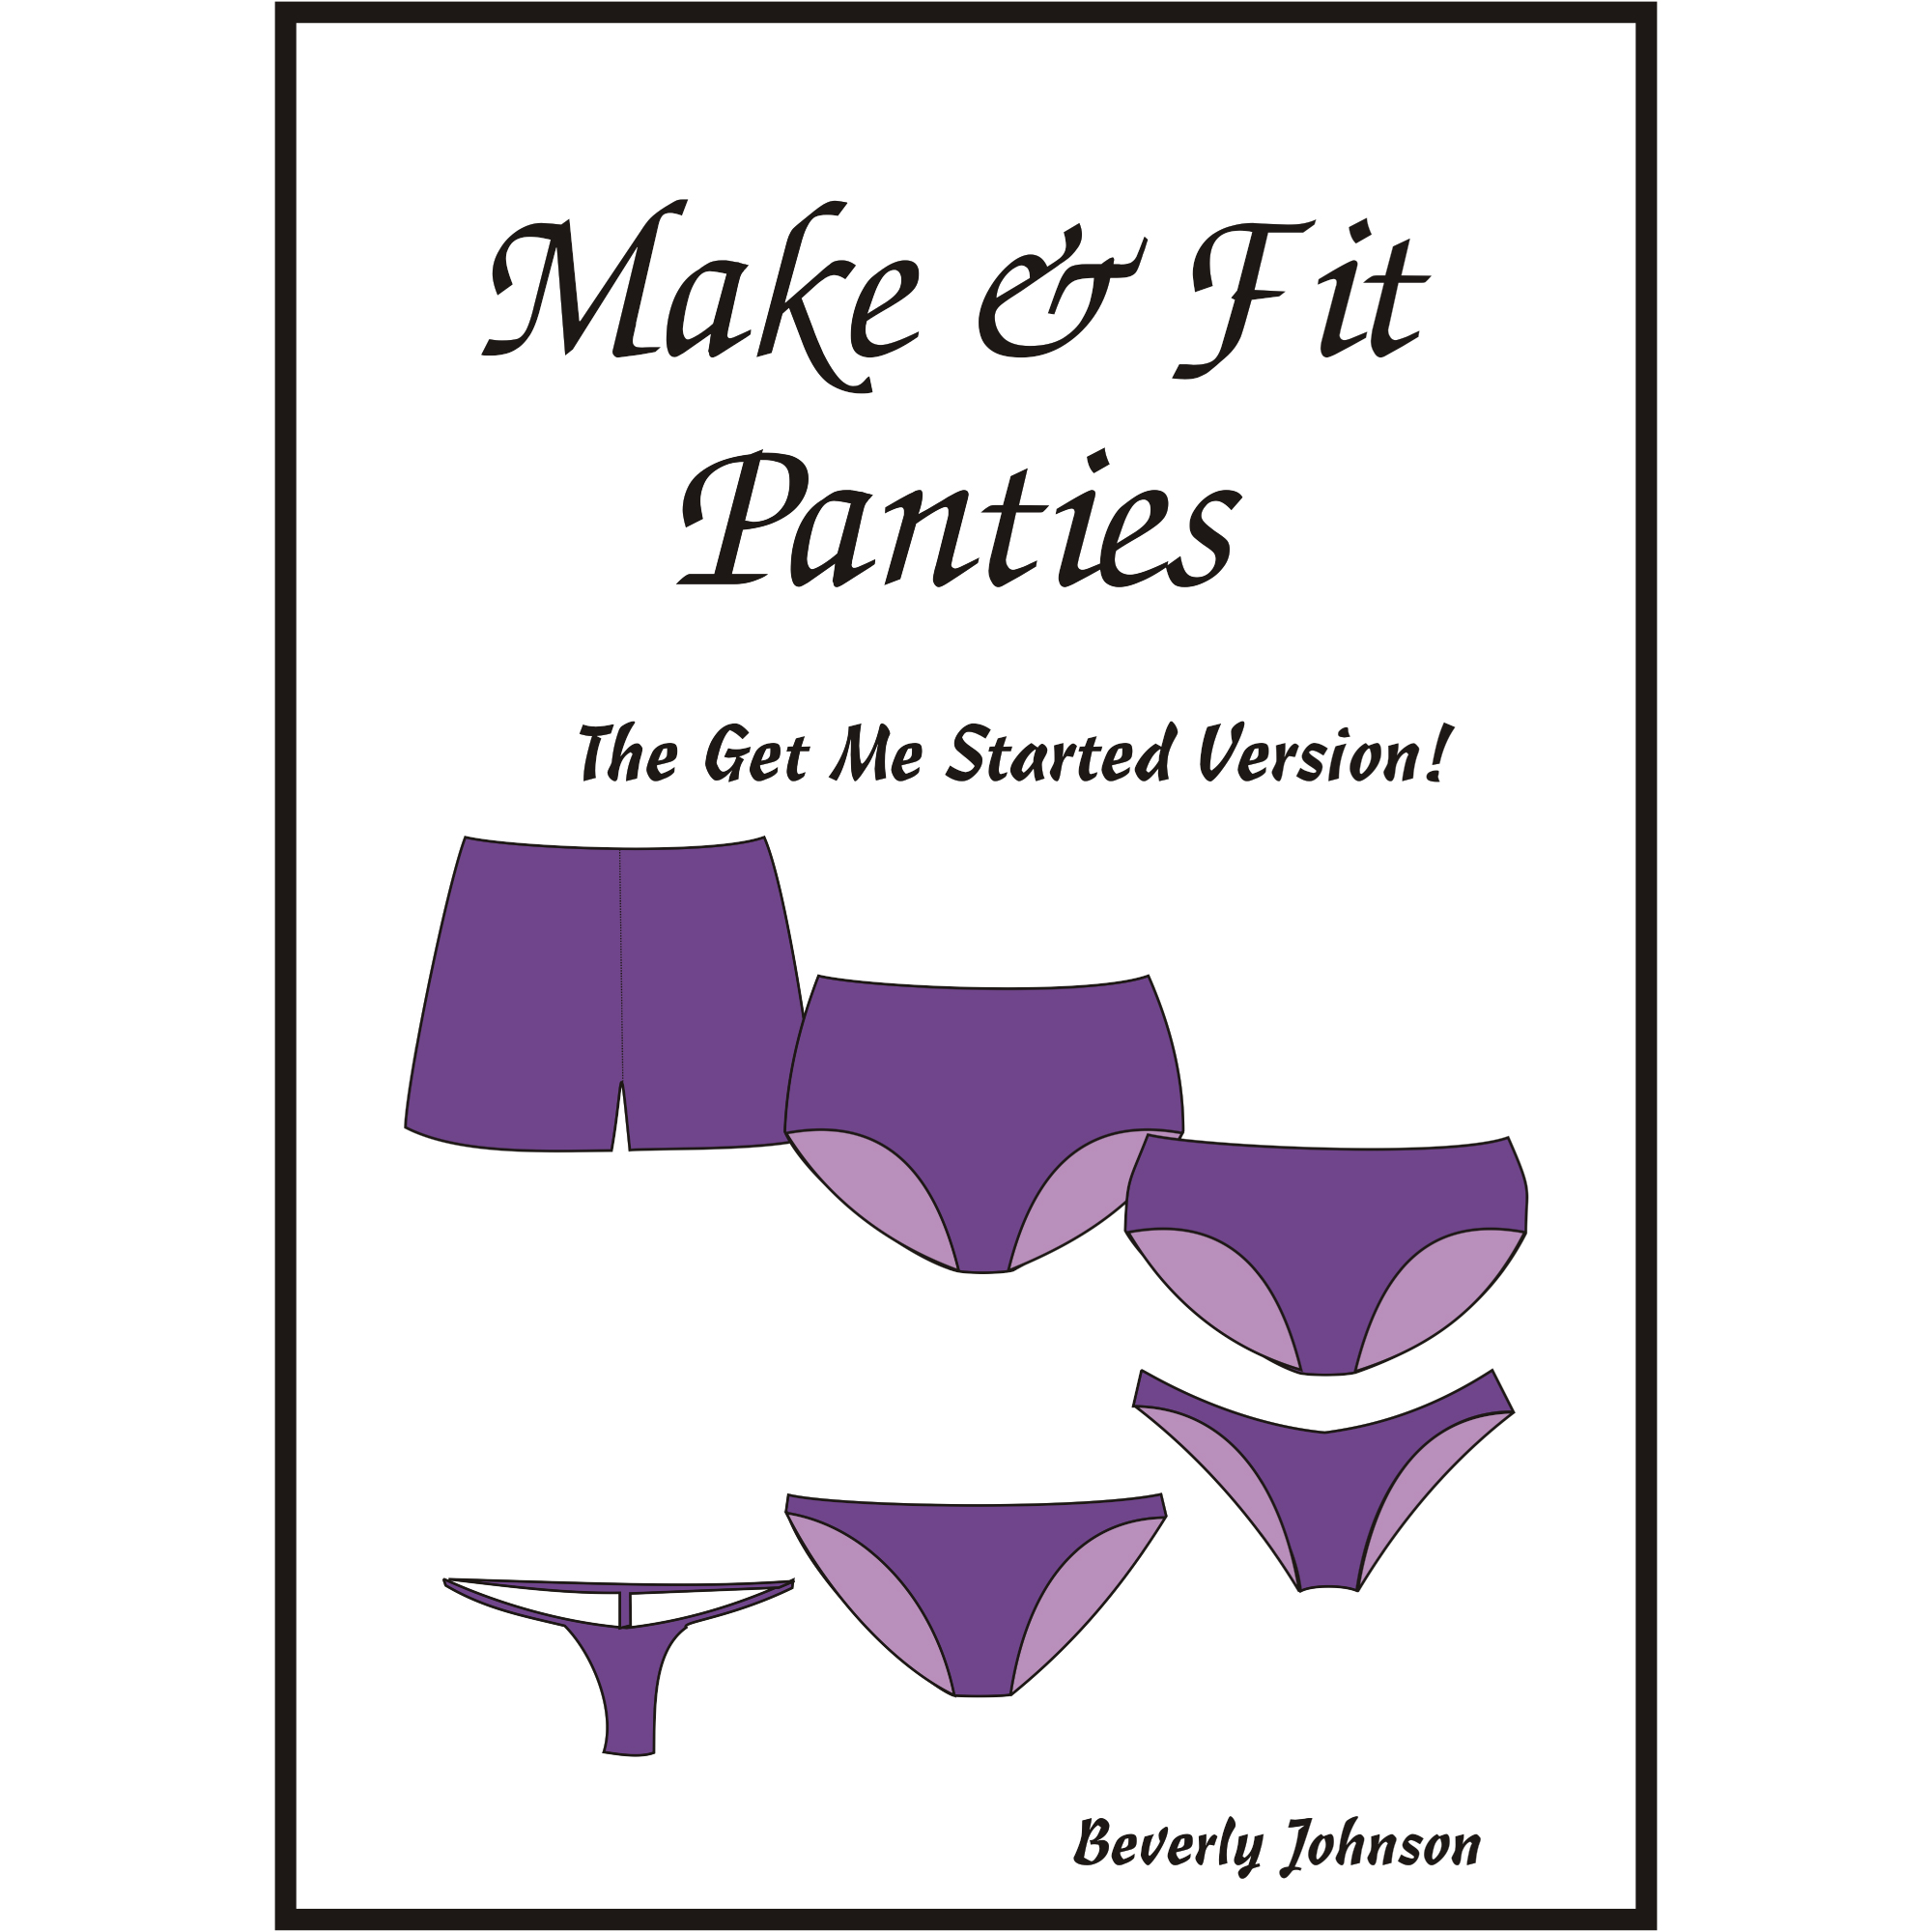 make & fit panties book by Beverly V. Johsnson QB-300 from Bra-Makers Supply Hamilton line drawing shown